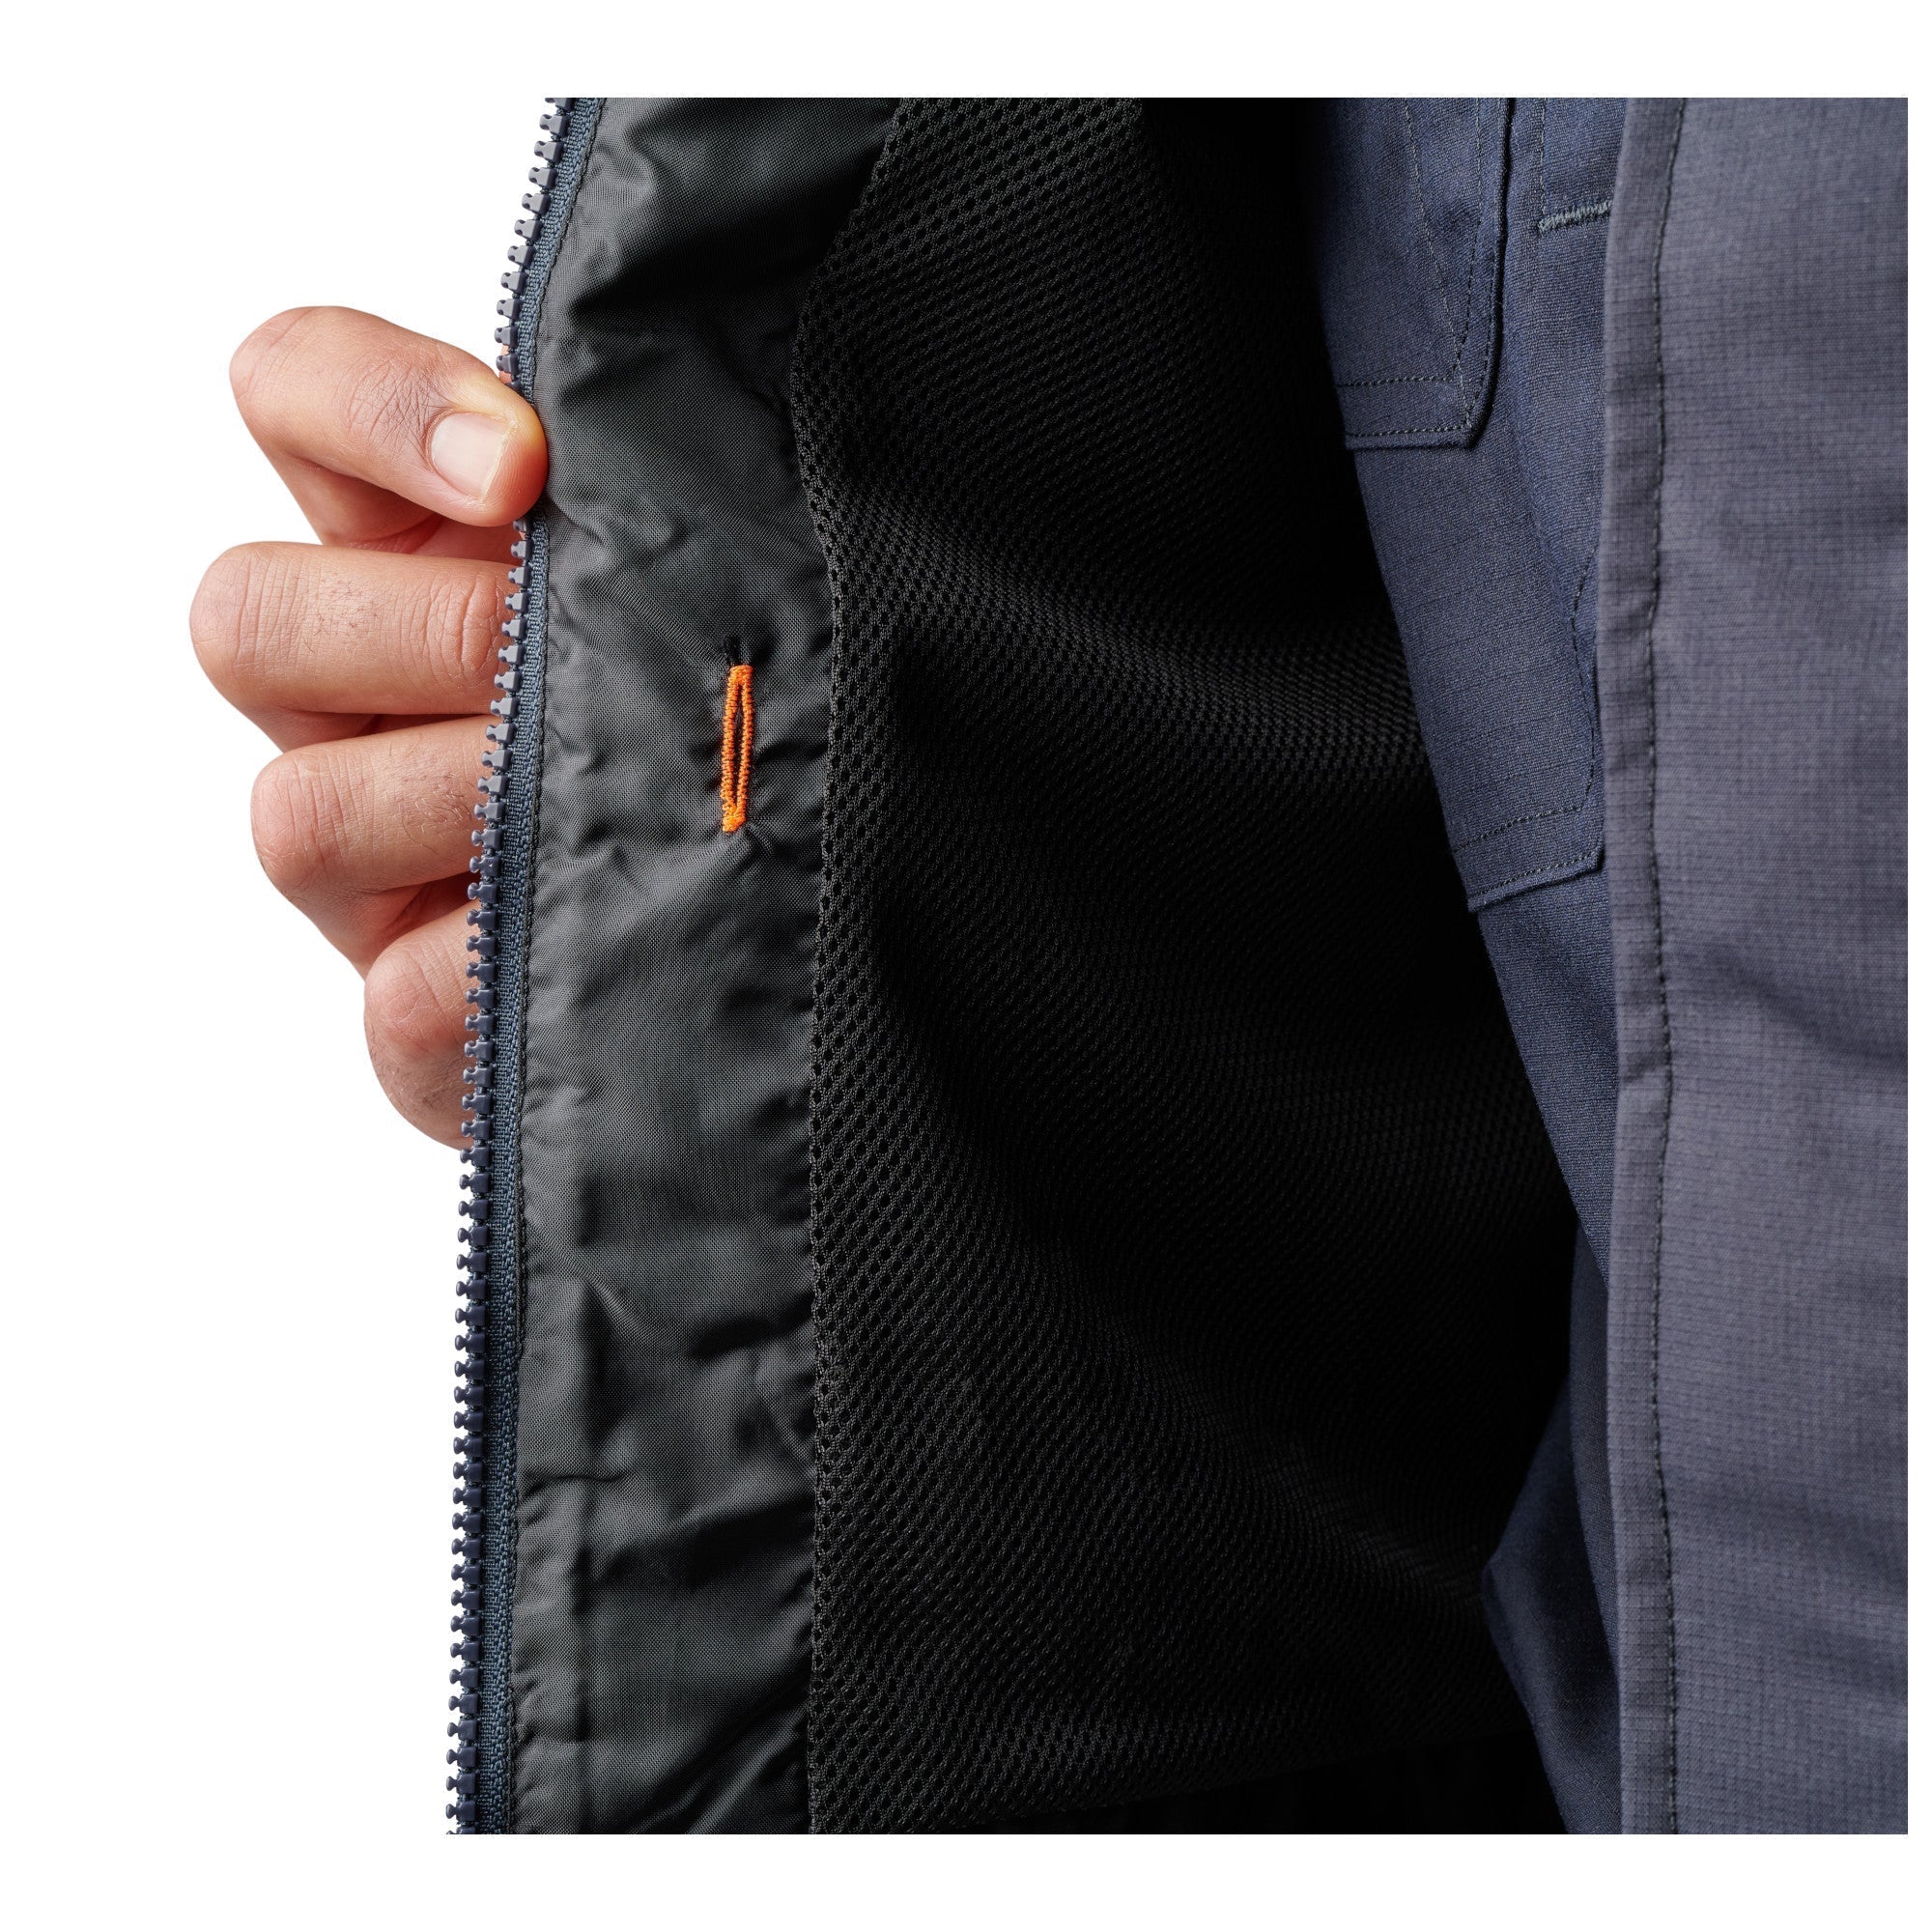 5.11 Tactical Tac-Dry Rain Shell 2.0 Outerwear 5.11 Tactical Tactical Gear Supplier Tactical Distributors Australia